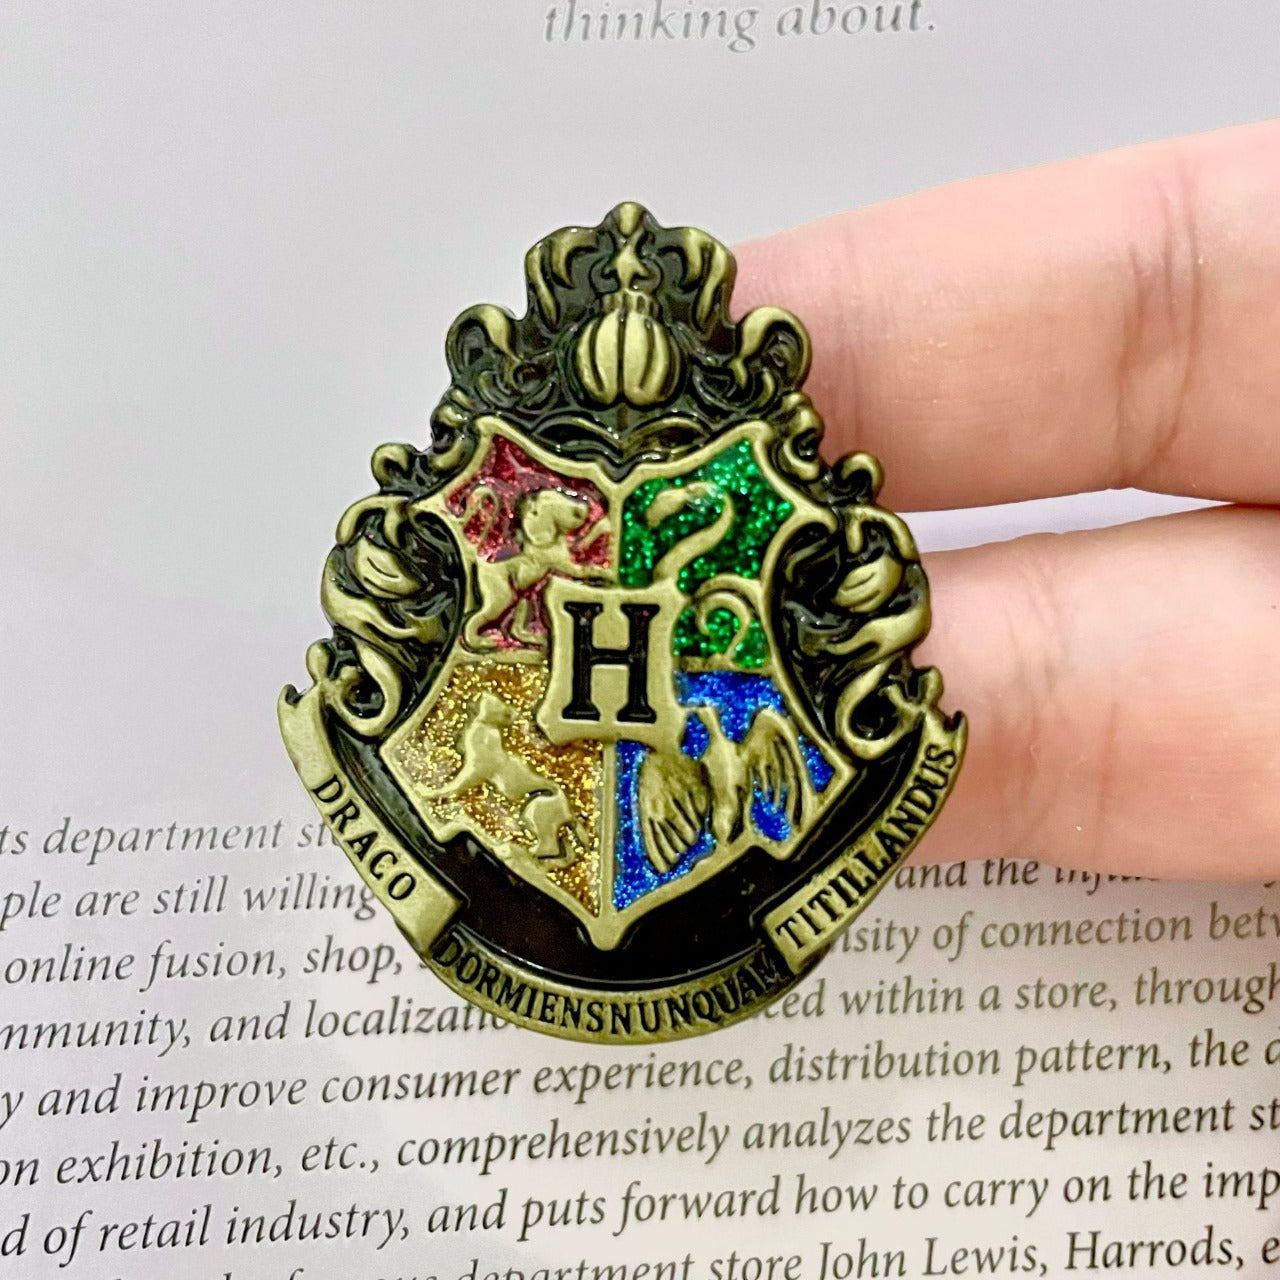 Pin on Harry Potter - Themed items & etc